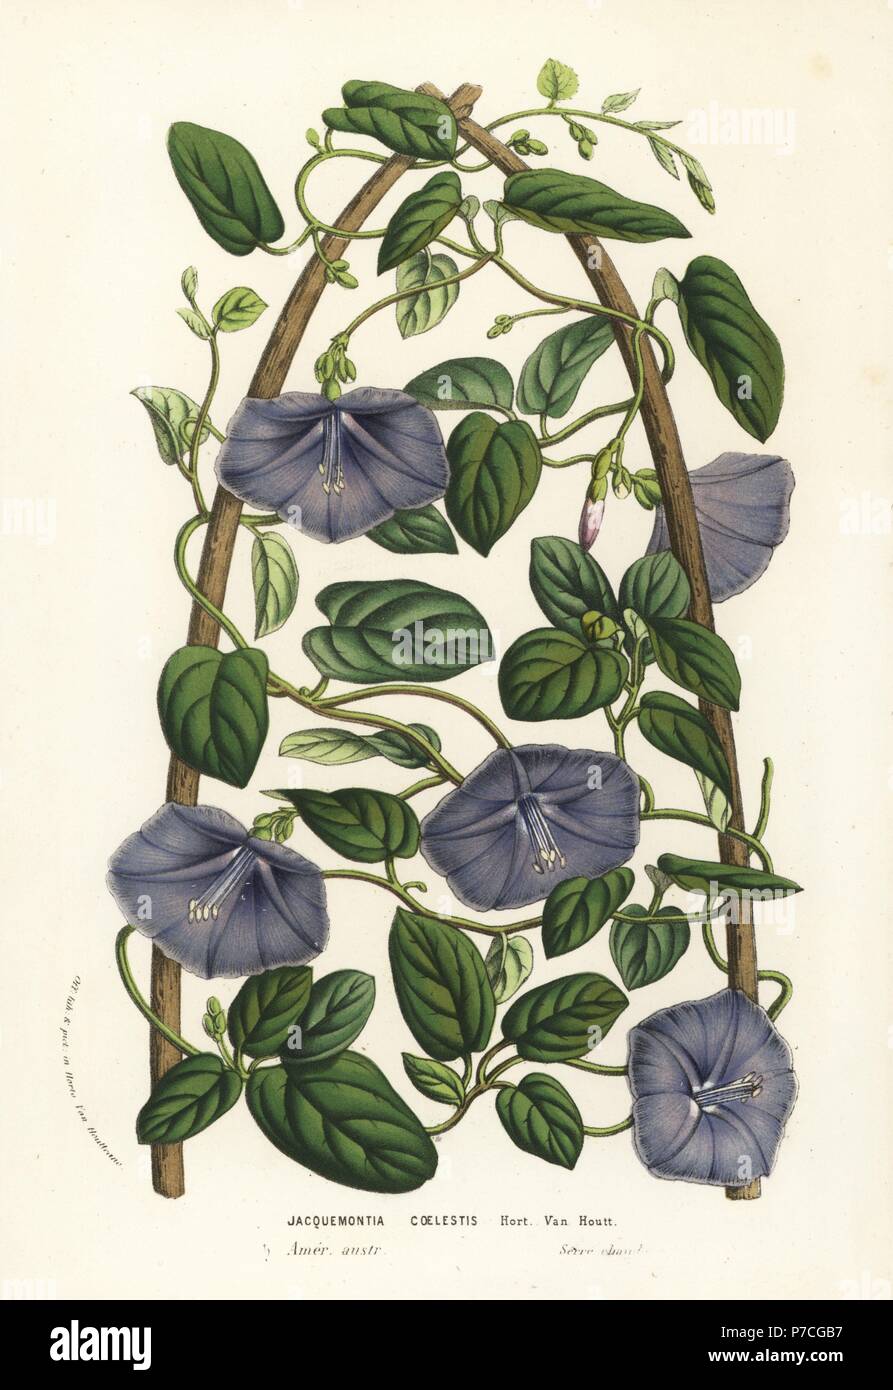 Beach clustervine, Jacquemontia coelestis. Handcoloured lithograph from Louis van Houtte and Charles Lemaire's Flowers of the Gardens and Hothouses of Europe, Flore des Serres et des Jardins de l'Europe, Ghent, Belgium, 1856. Stock Photo